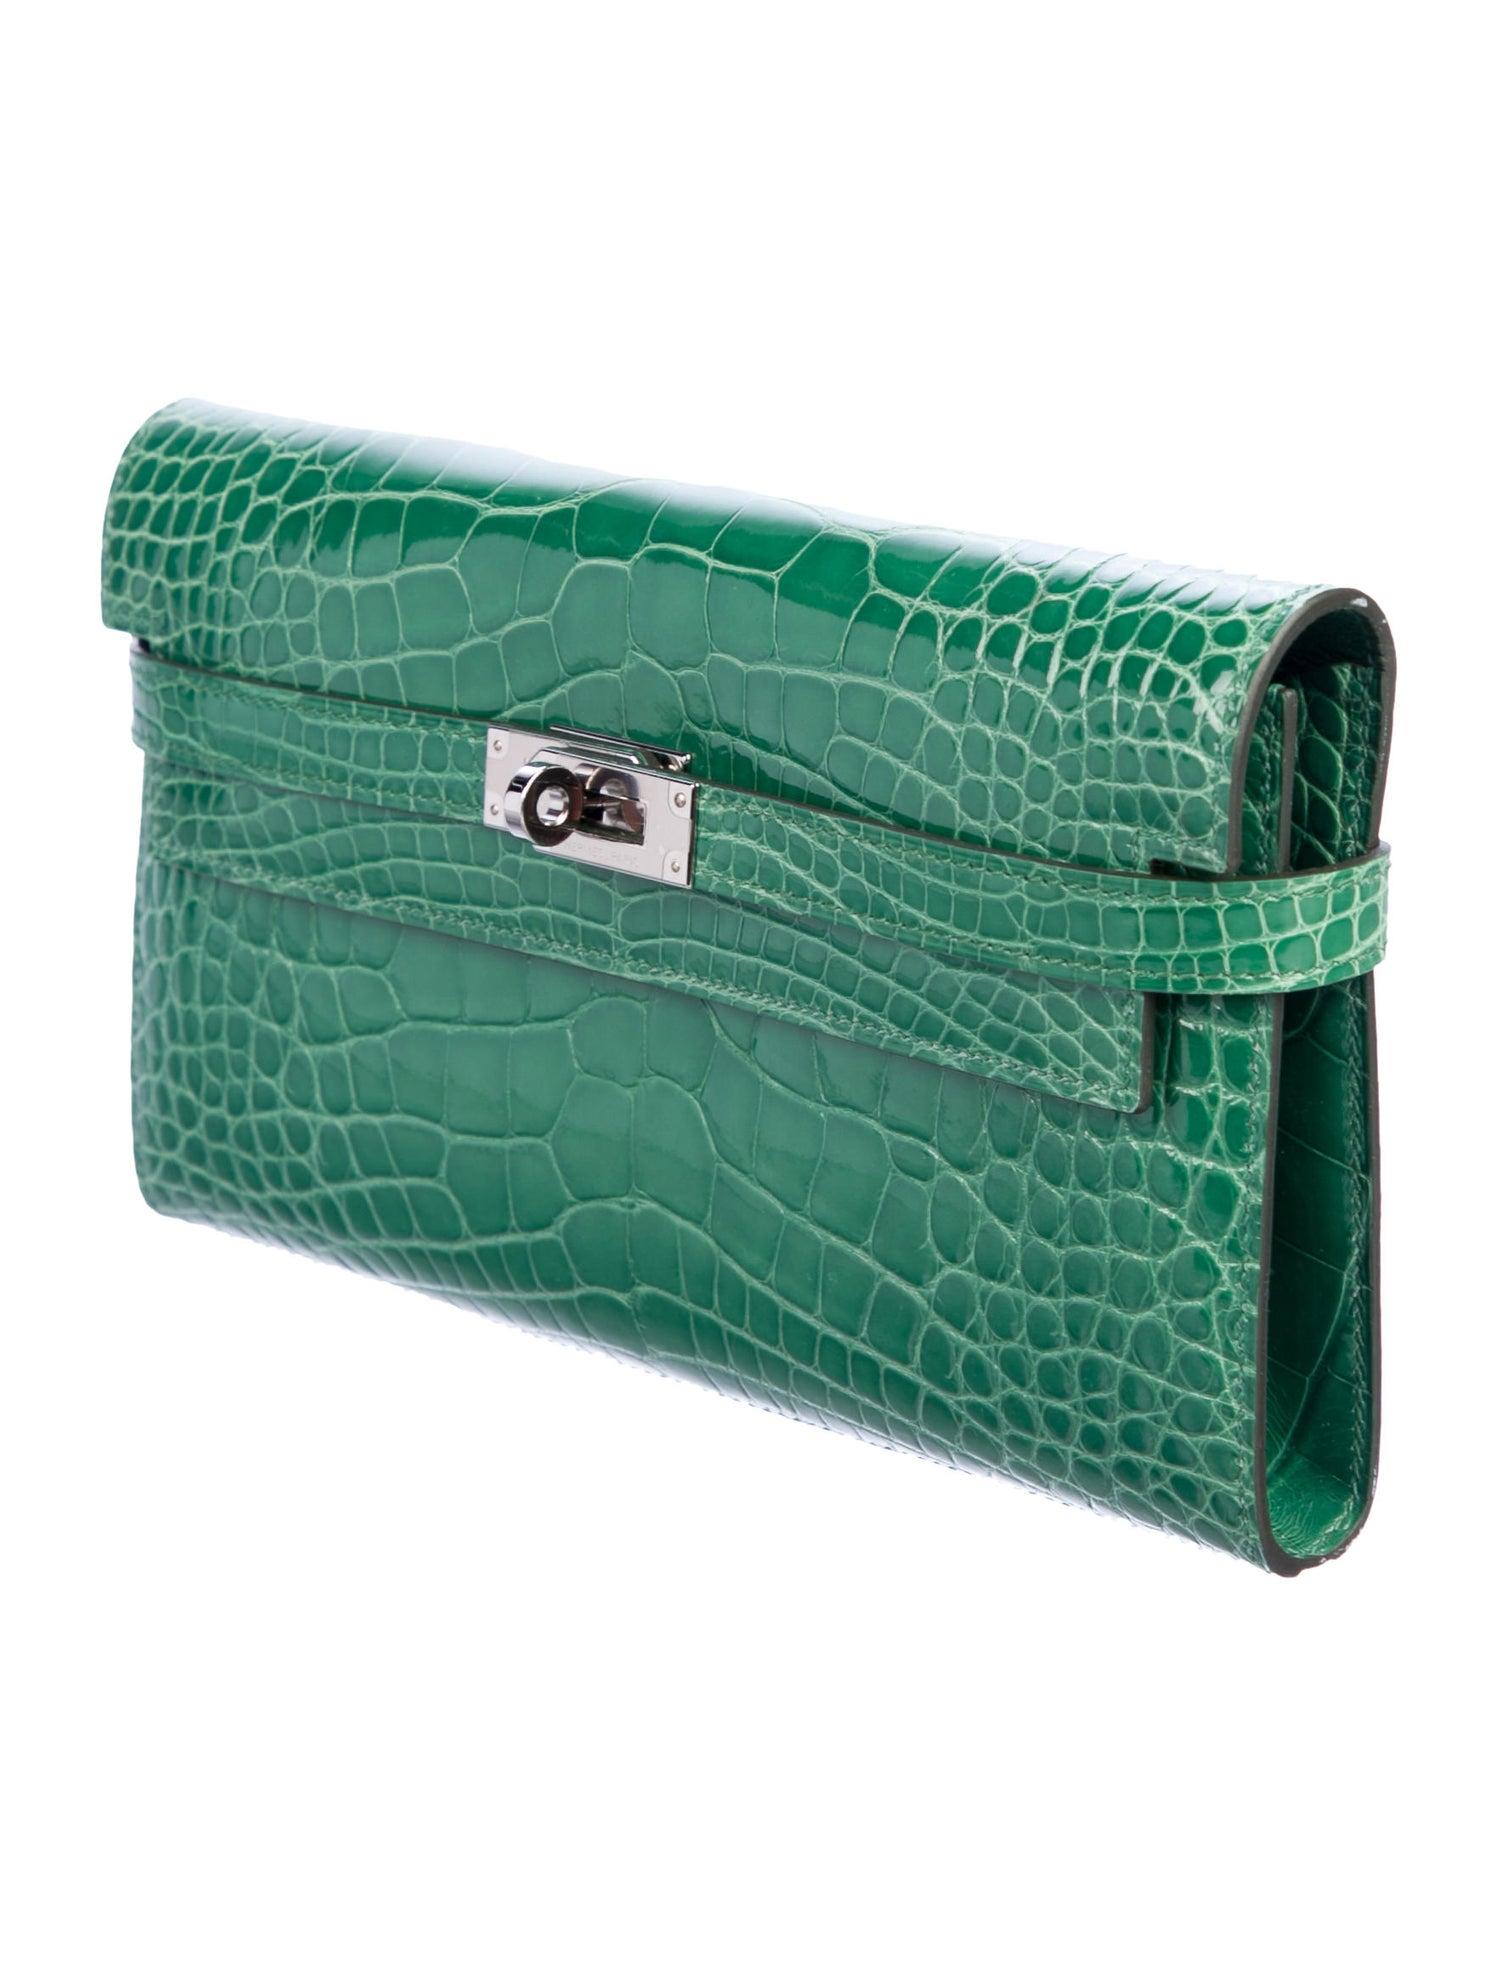 Hermes Green Alligator Exotic Palladium Silver Evening Kelly Clutch Wallet Bag in Box

Alligator 
Palladium tone hardware
Turnlock closure
Leather lining
Date code present
Made in France
Features zip closure, bill compartment and 12 card slots